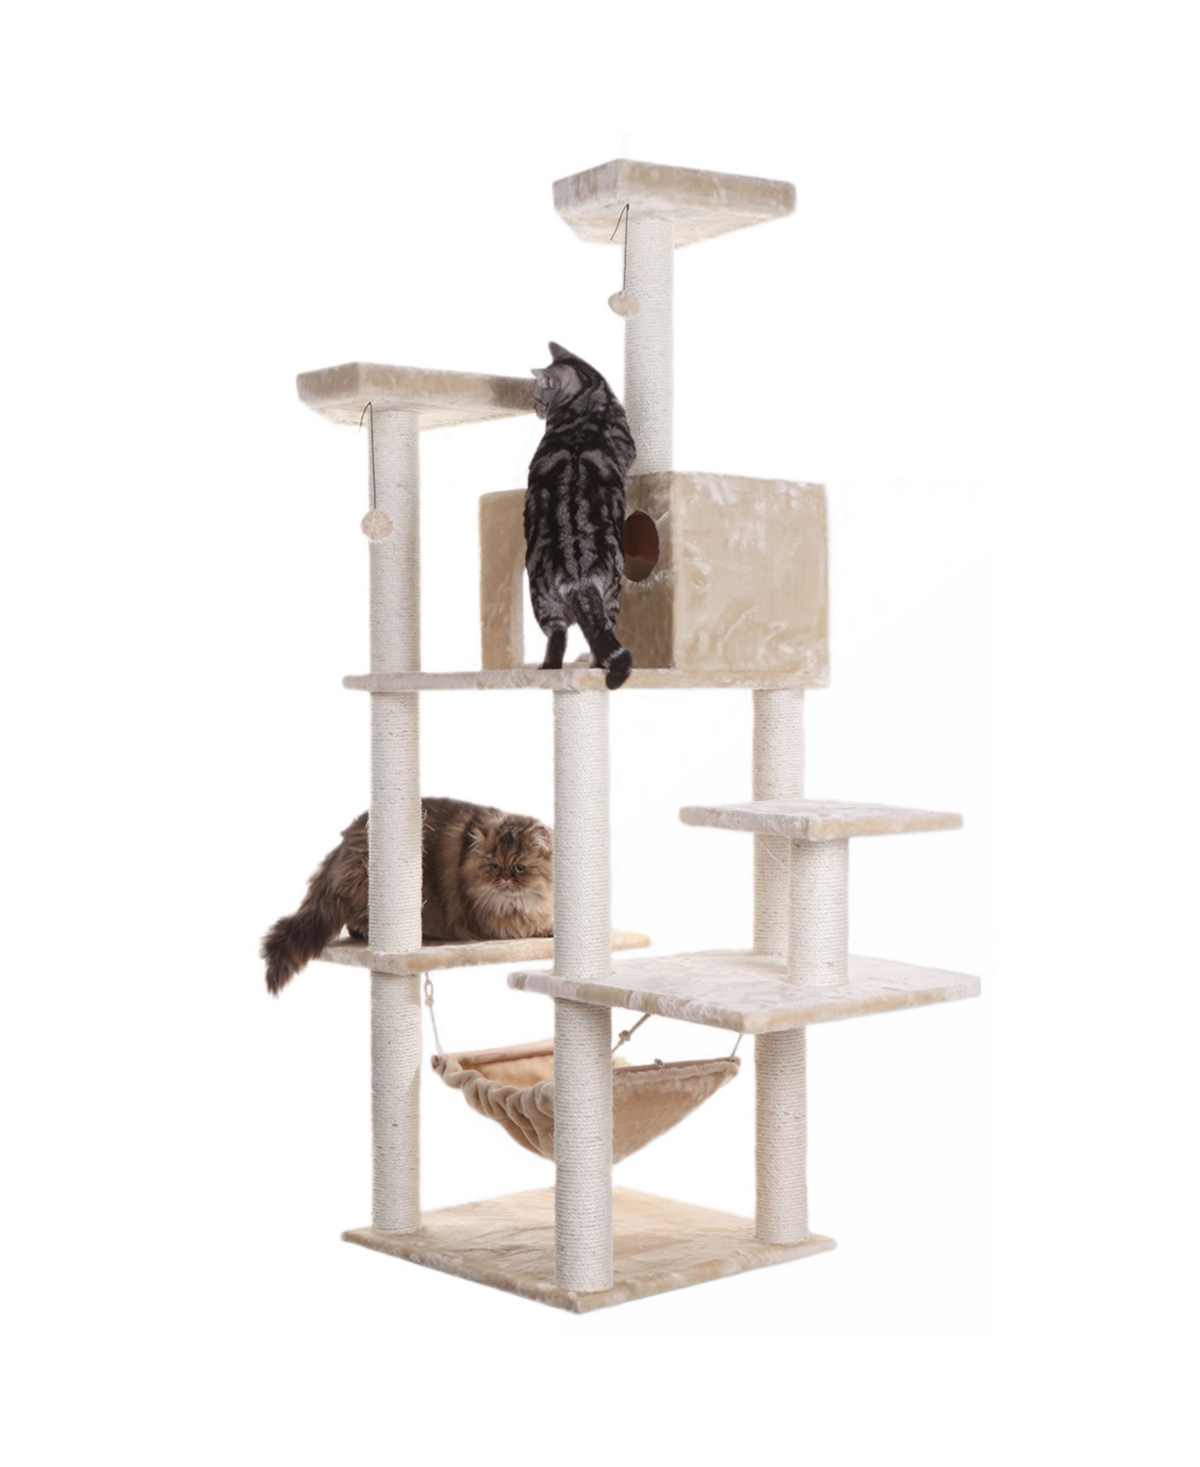 72" Real Wood Cat Tree With Spacious Condo, Scratching Post - Beige